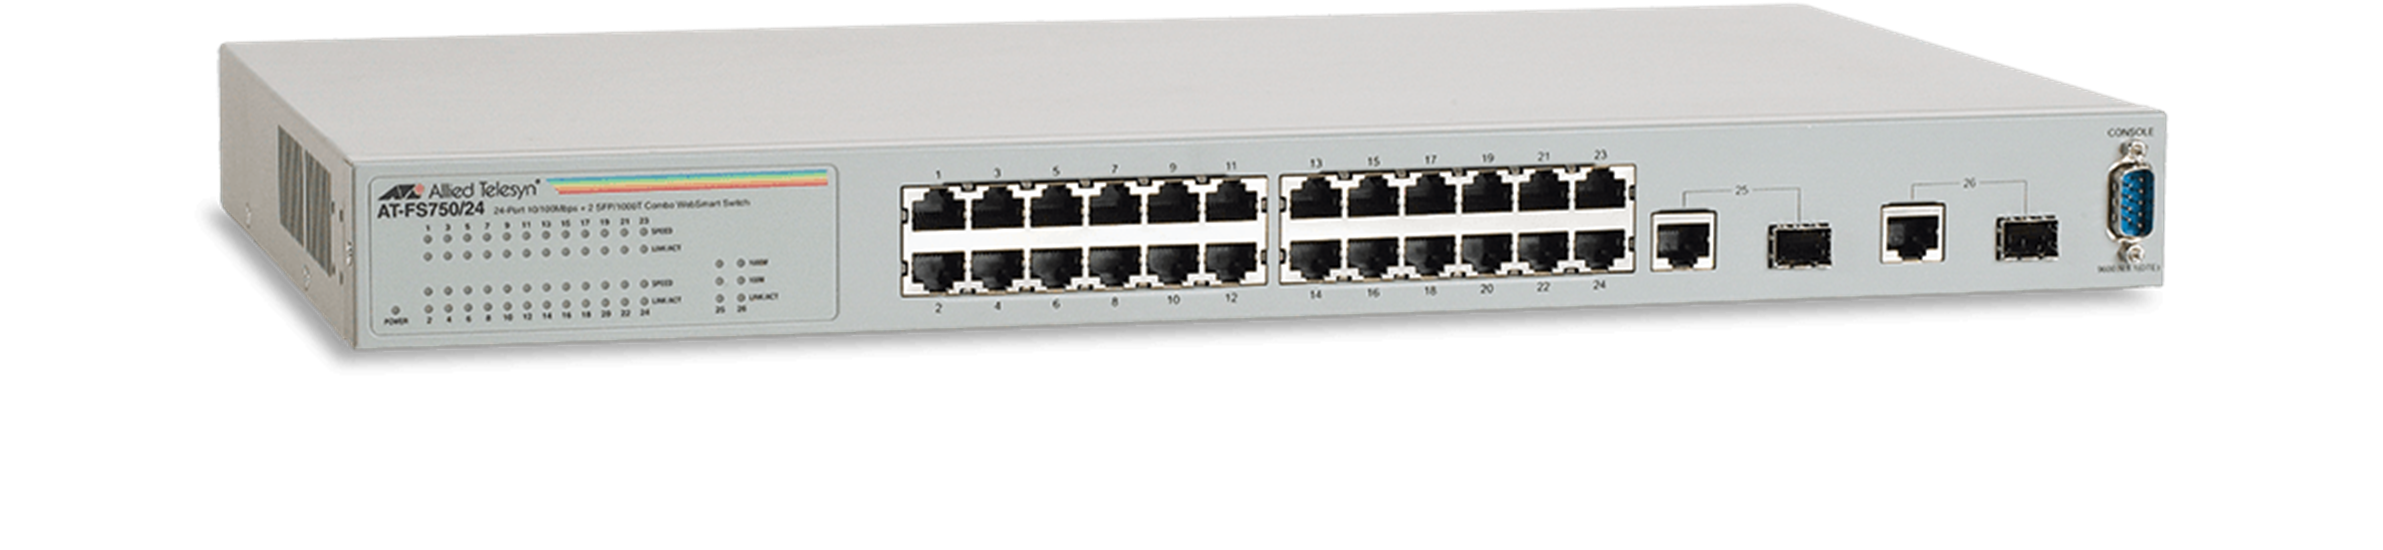 AT-FS750 Series - Layer 2 Websmart Fast Ethernet Switch